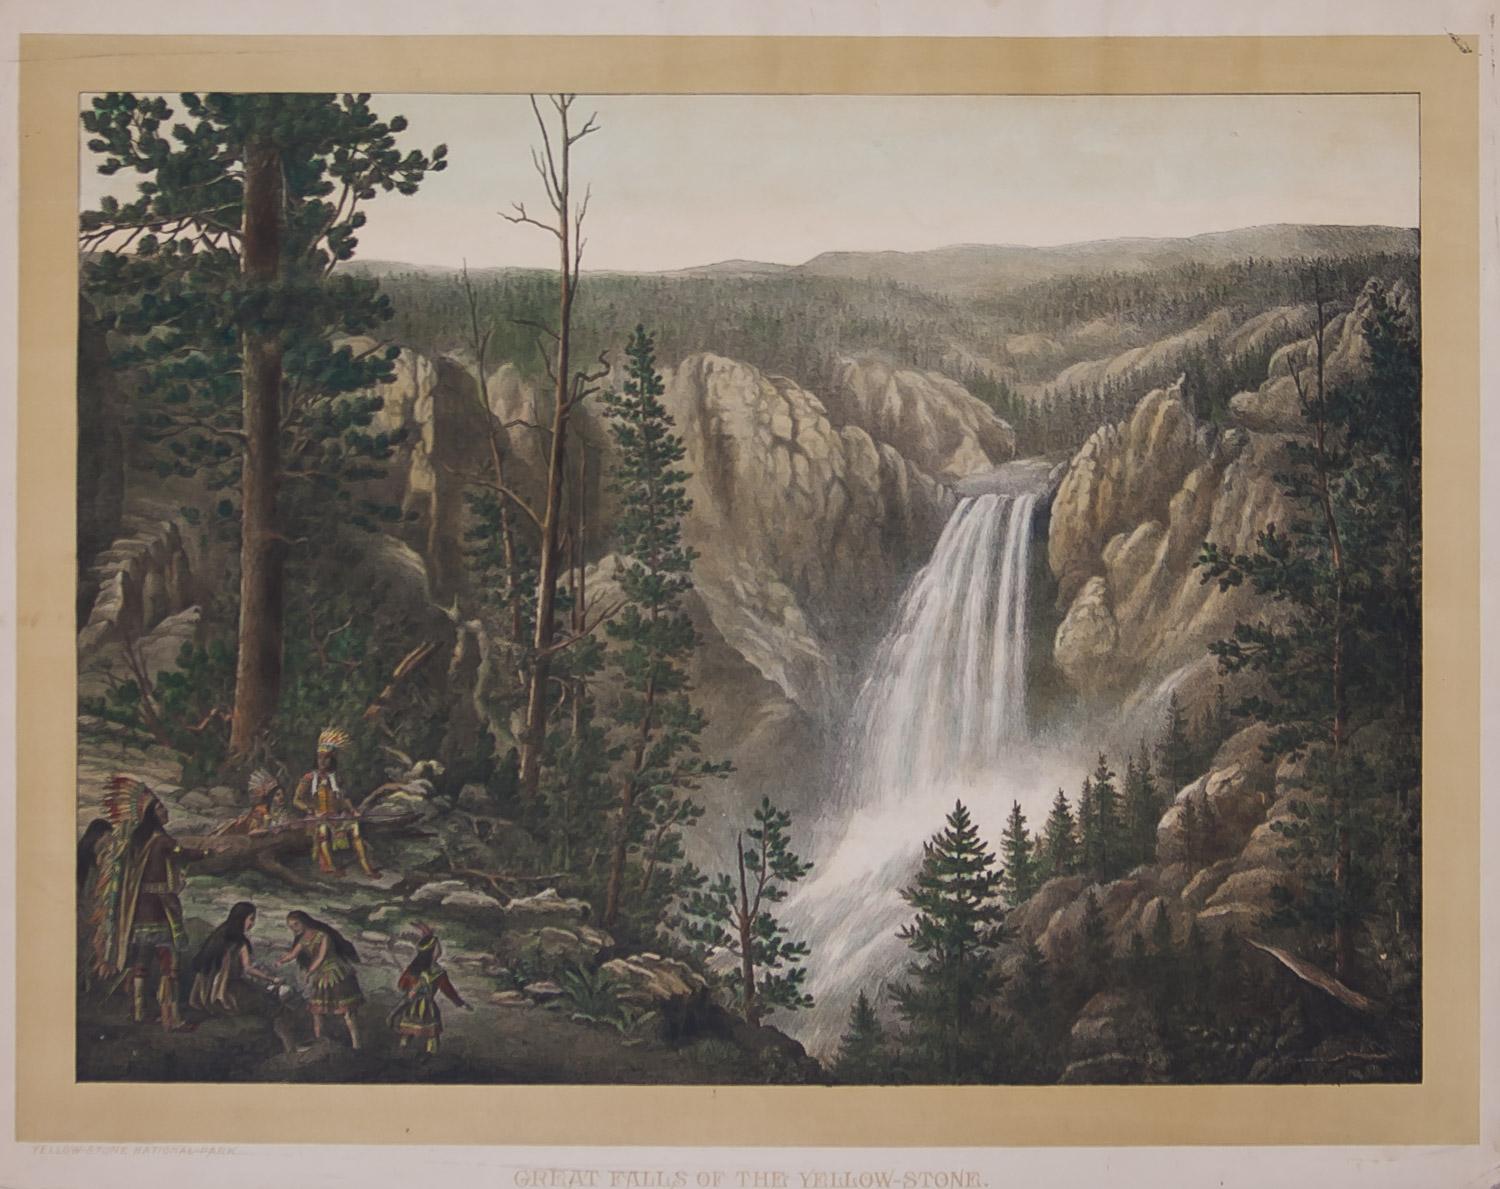 Unknown Landscape Print – Great Falls of the Yellow-Stone, Yellowstone-Nationalpark 1880